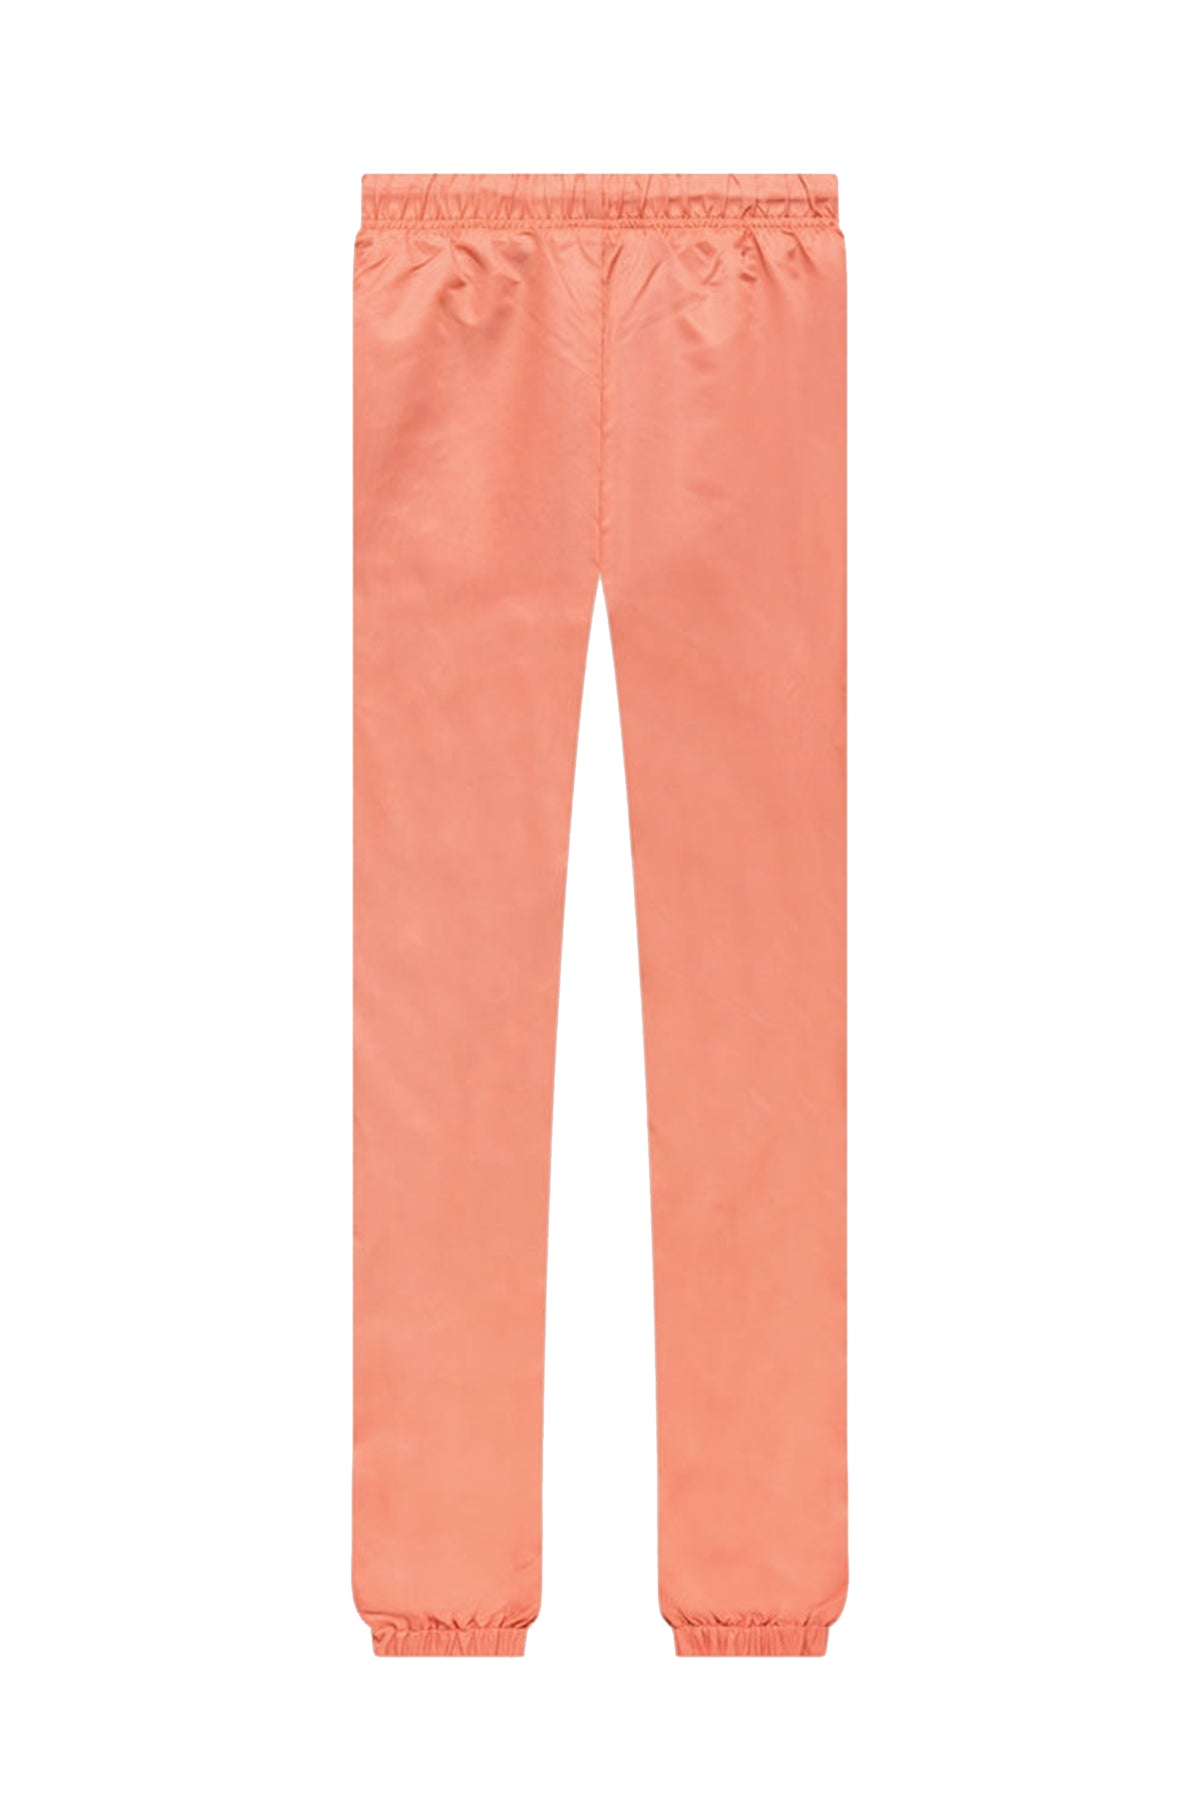 TRACK PANT / CORAL